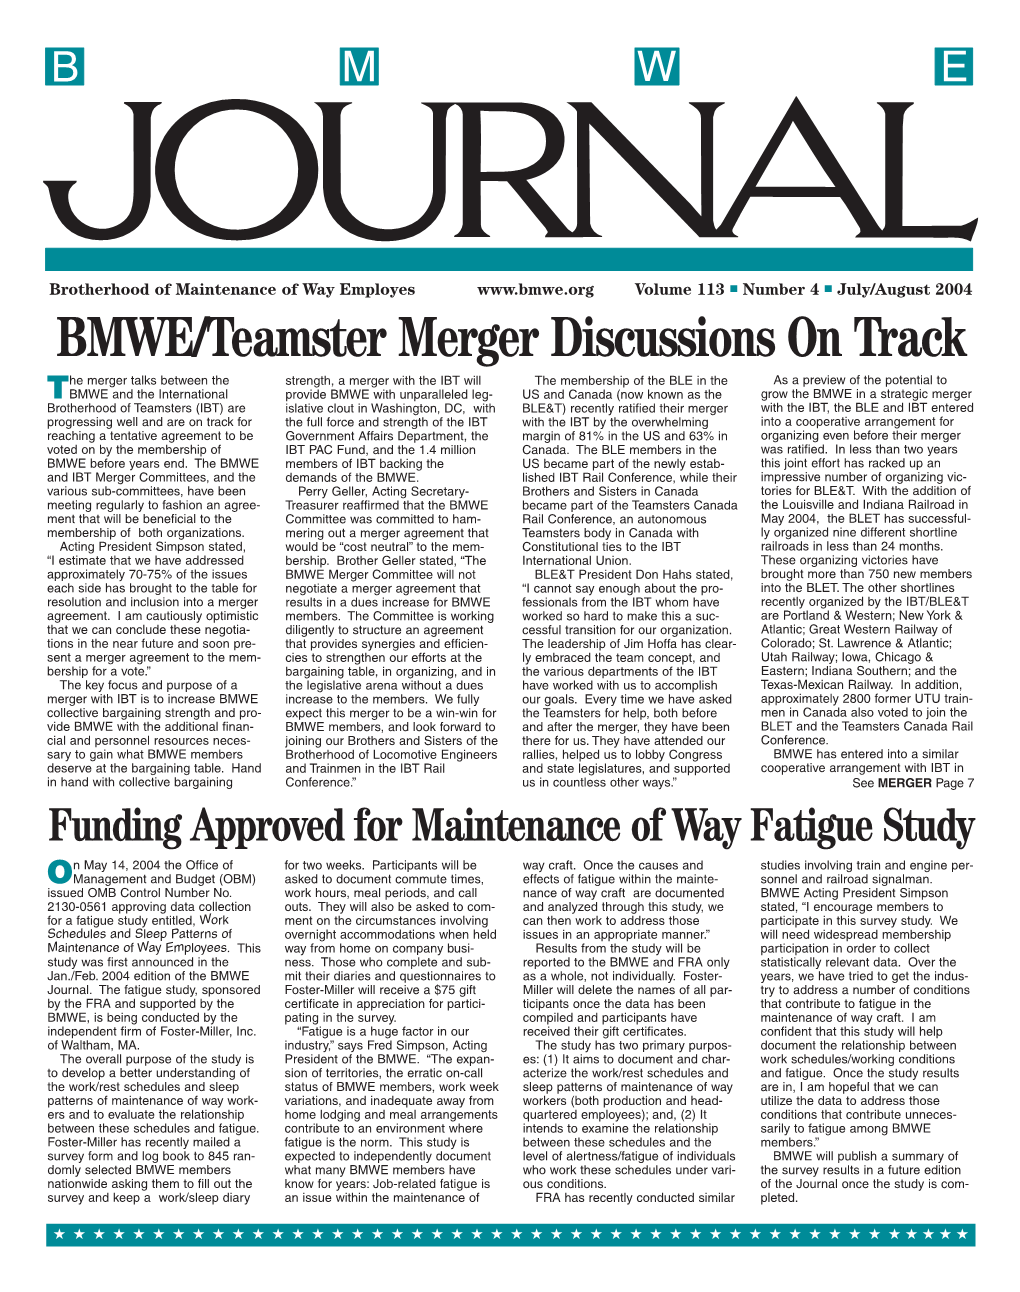 BMWE/Teamster Merger Discussions on Track